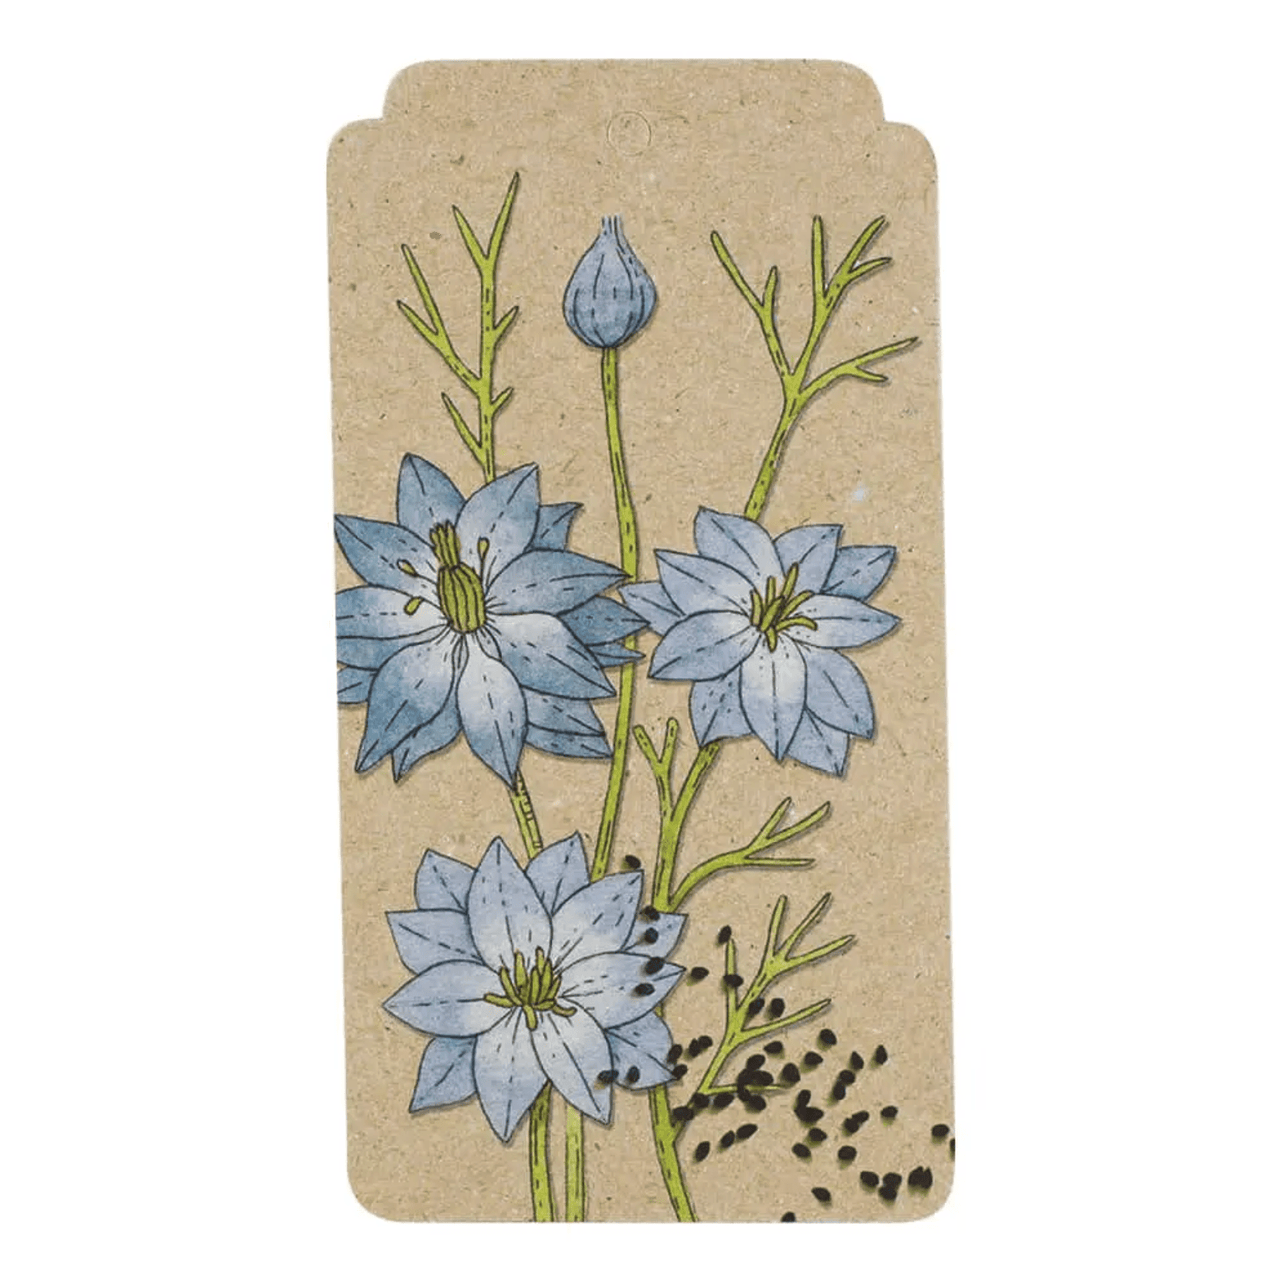 A brown envelope with blue flowers on it was replaced by A Gift Tag - Love in a Mist from the brand Sow n Sow.